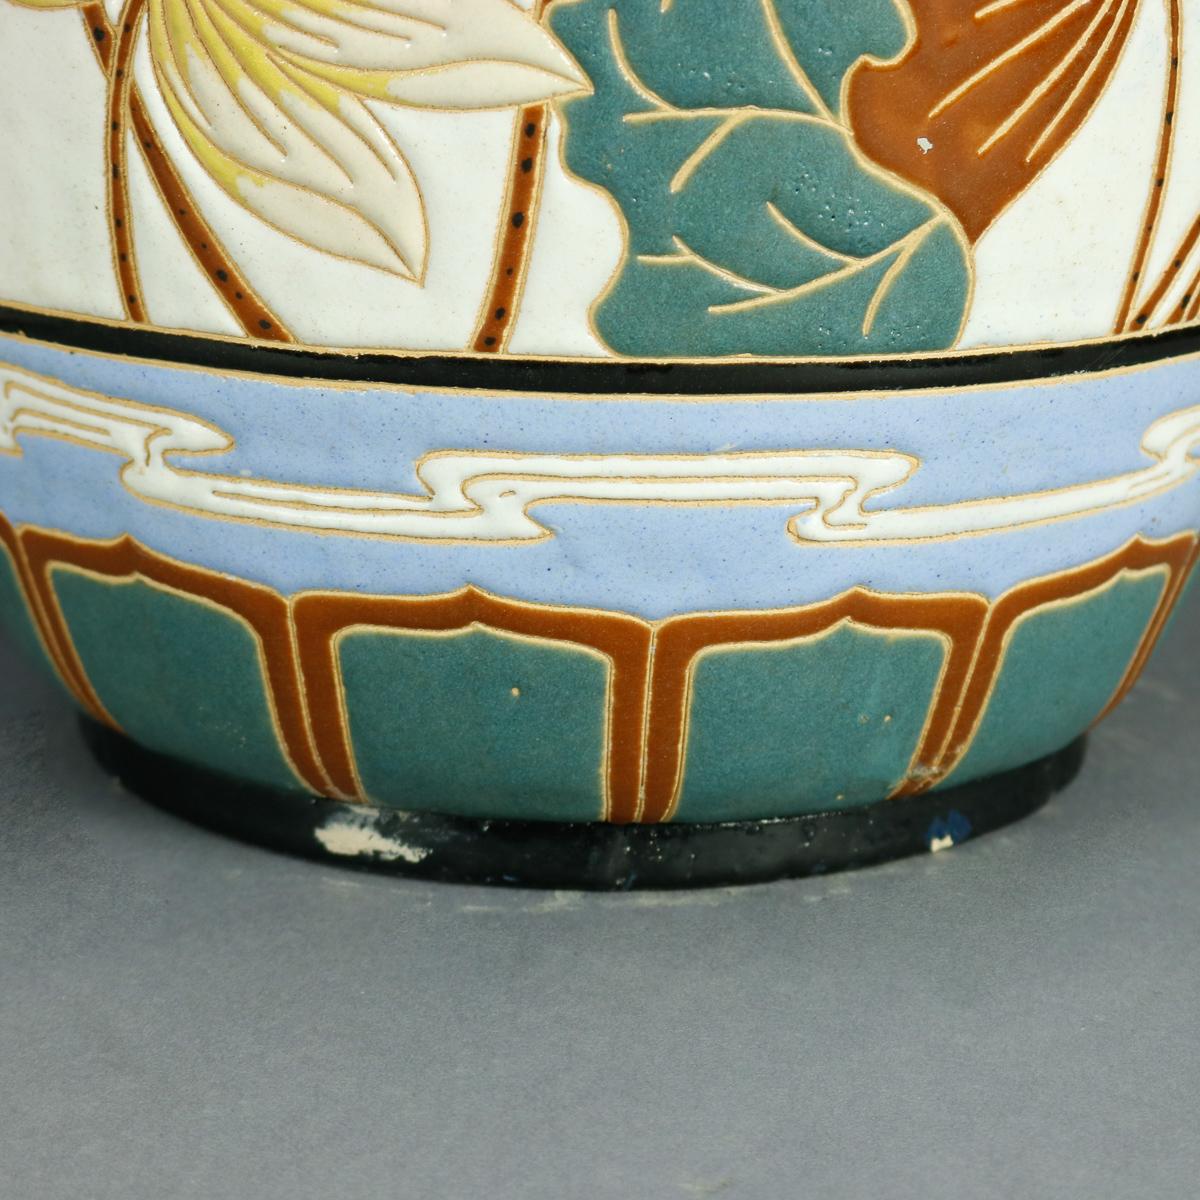 20th Century Antique Pair of Monumental Chinese Enameled and Embossed Ceramic Floor Vases